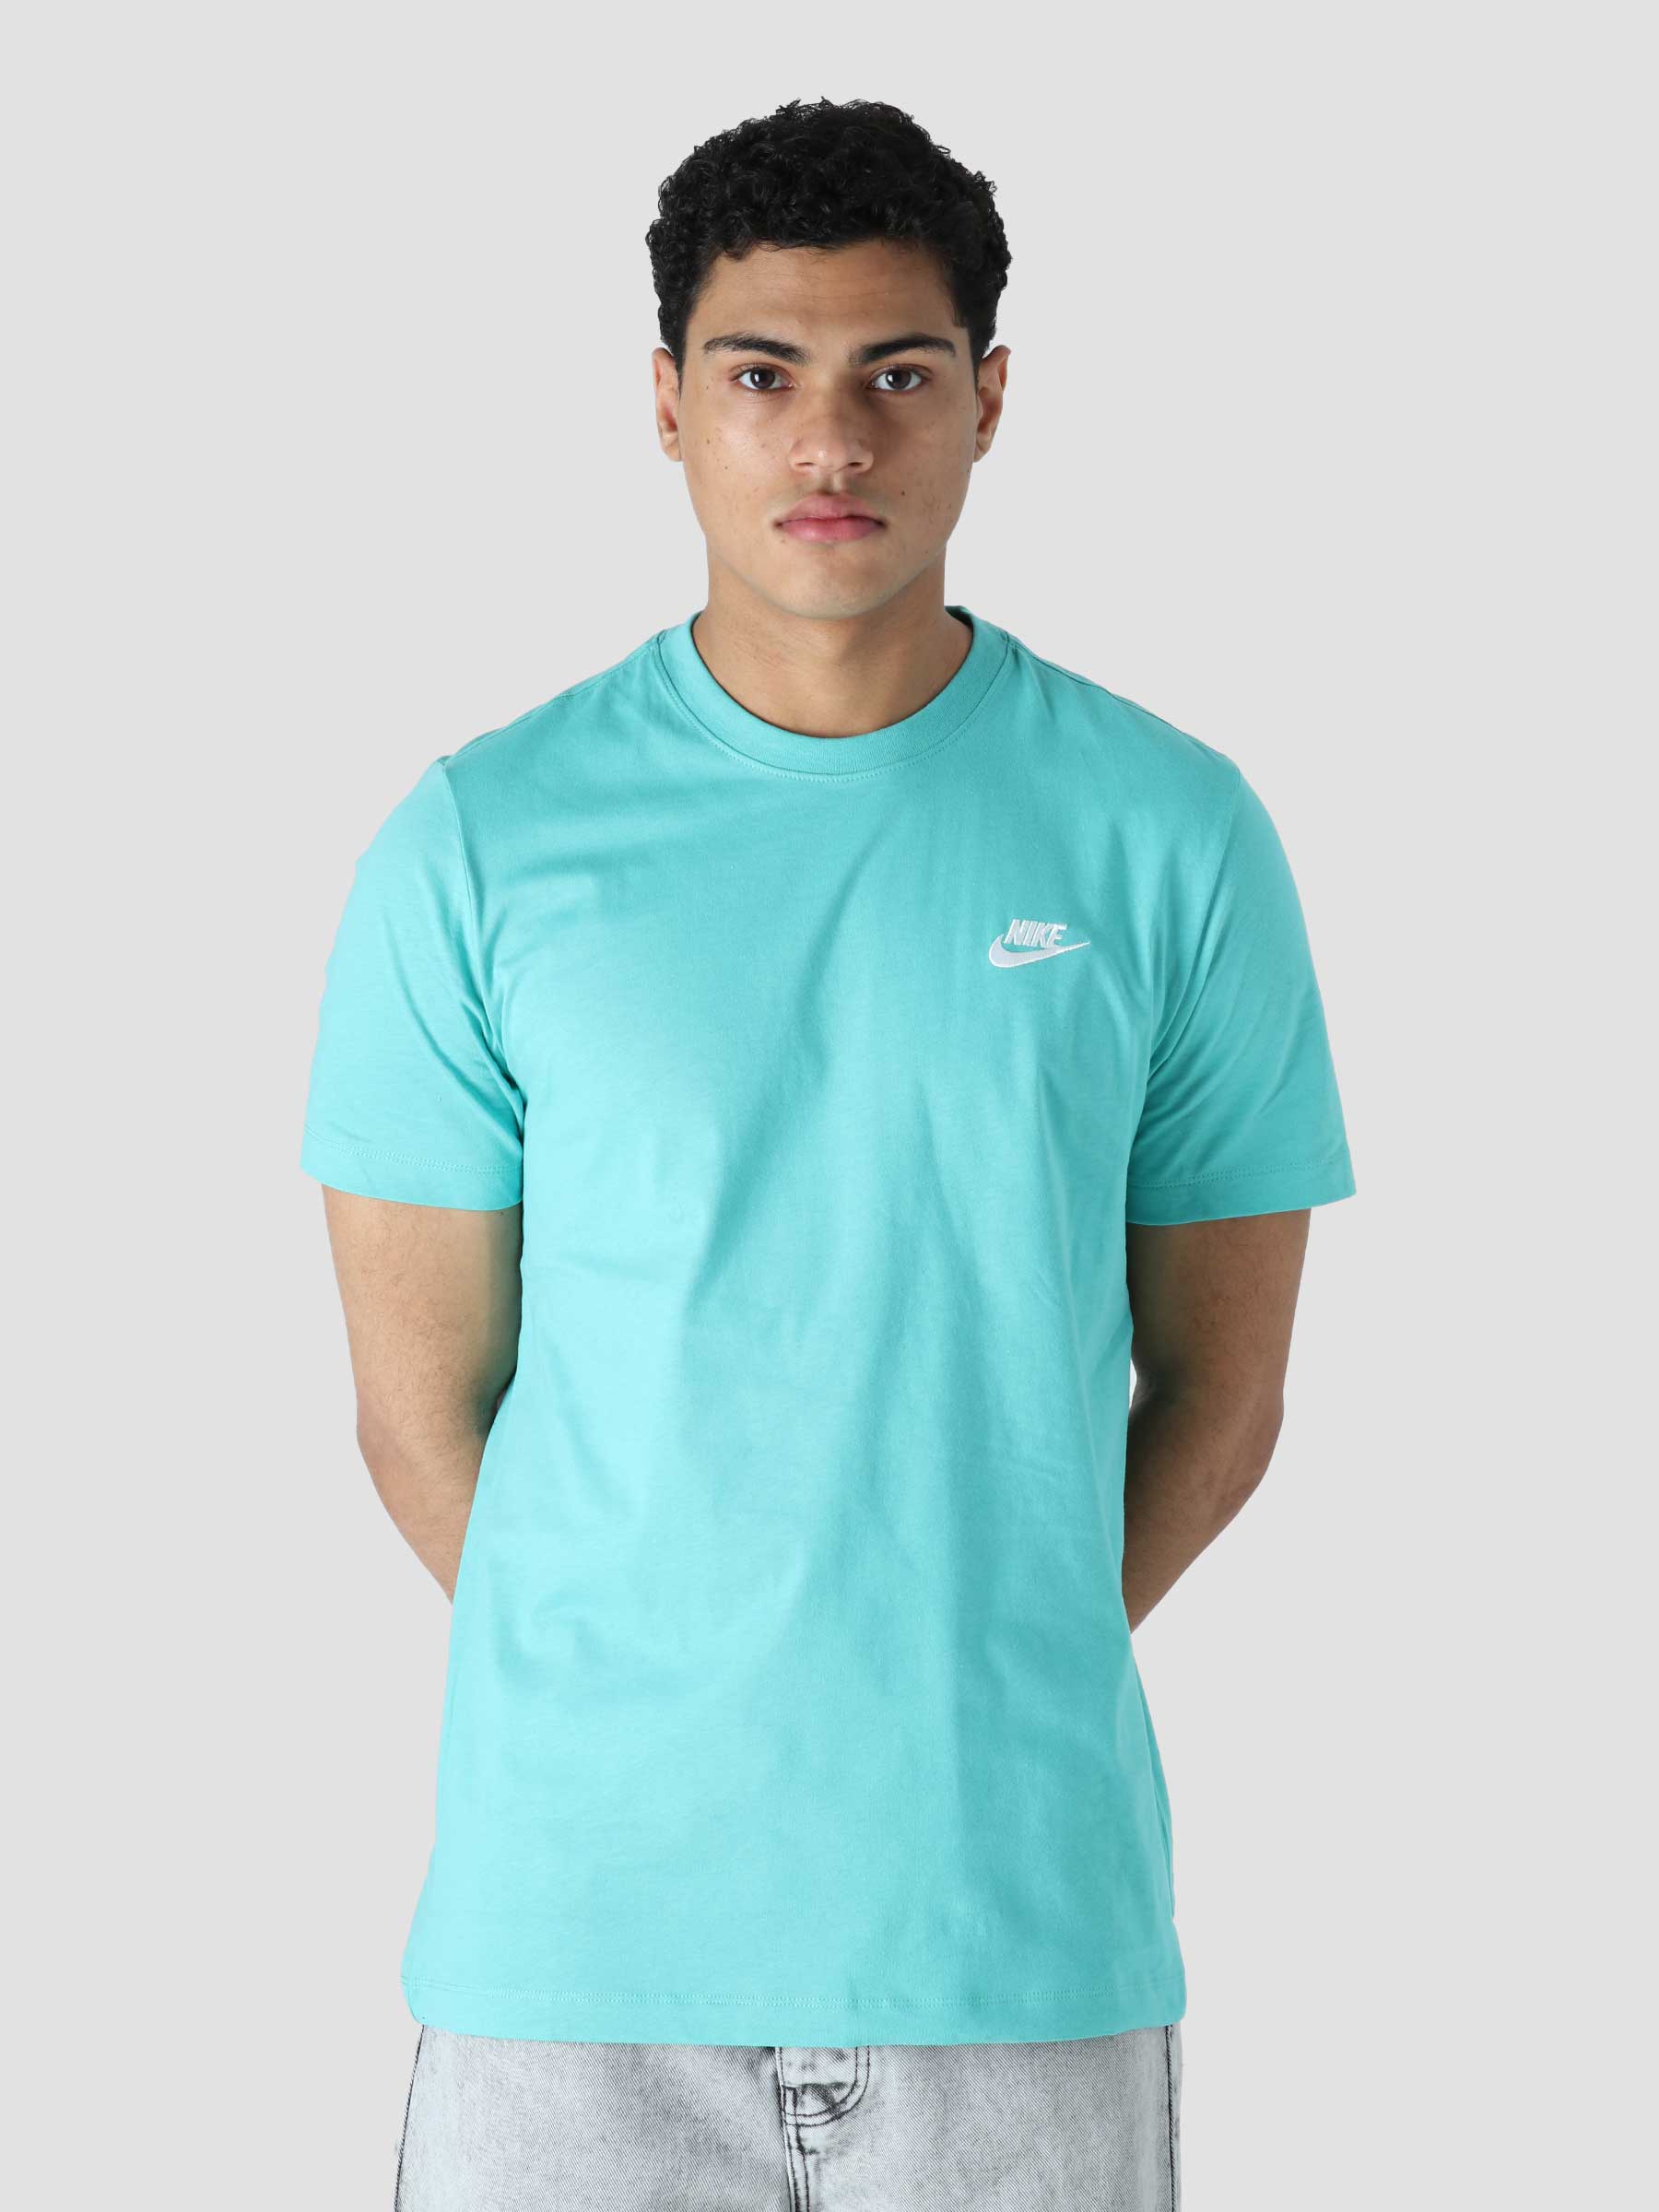 M NSW Club T-Shirt Washed Teal White AR4997-392